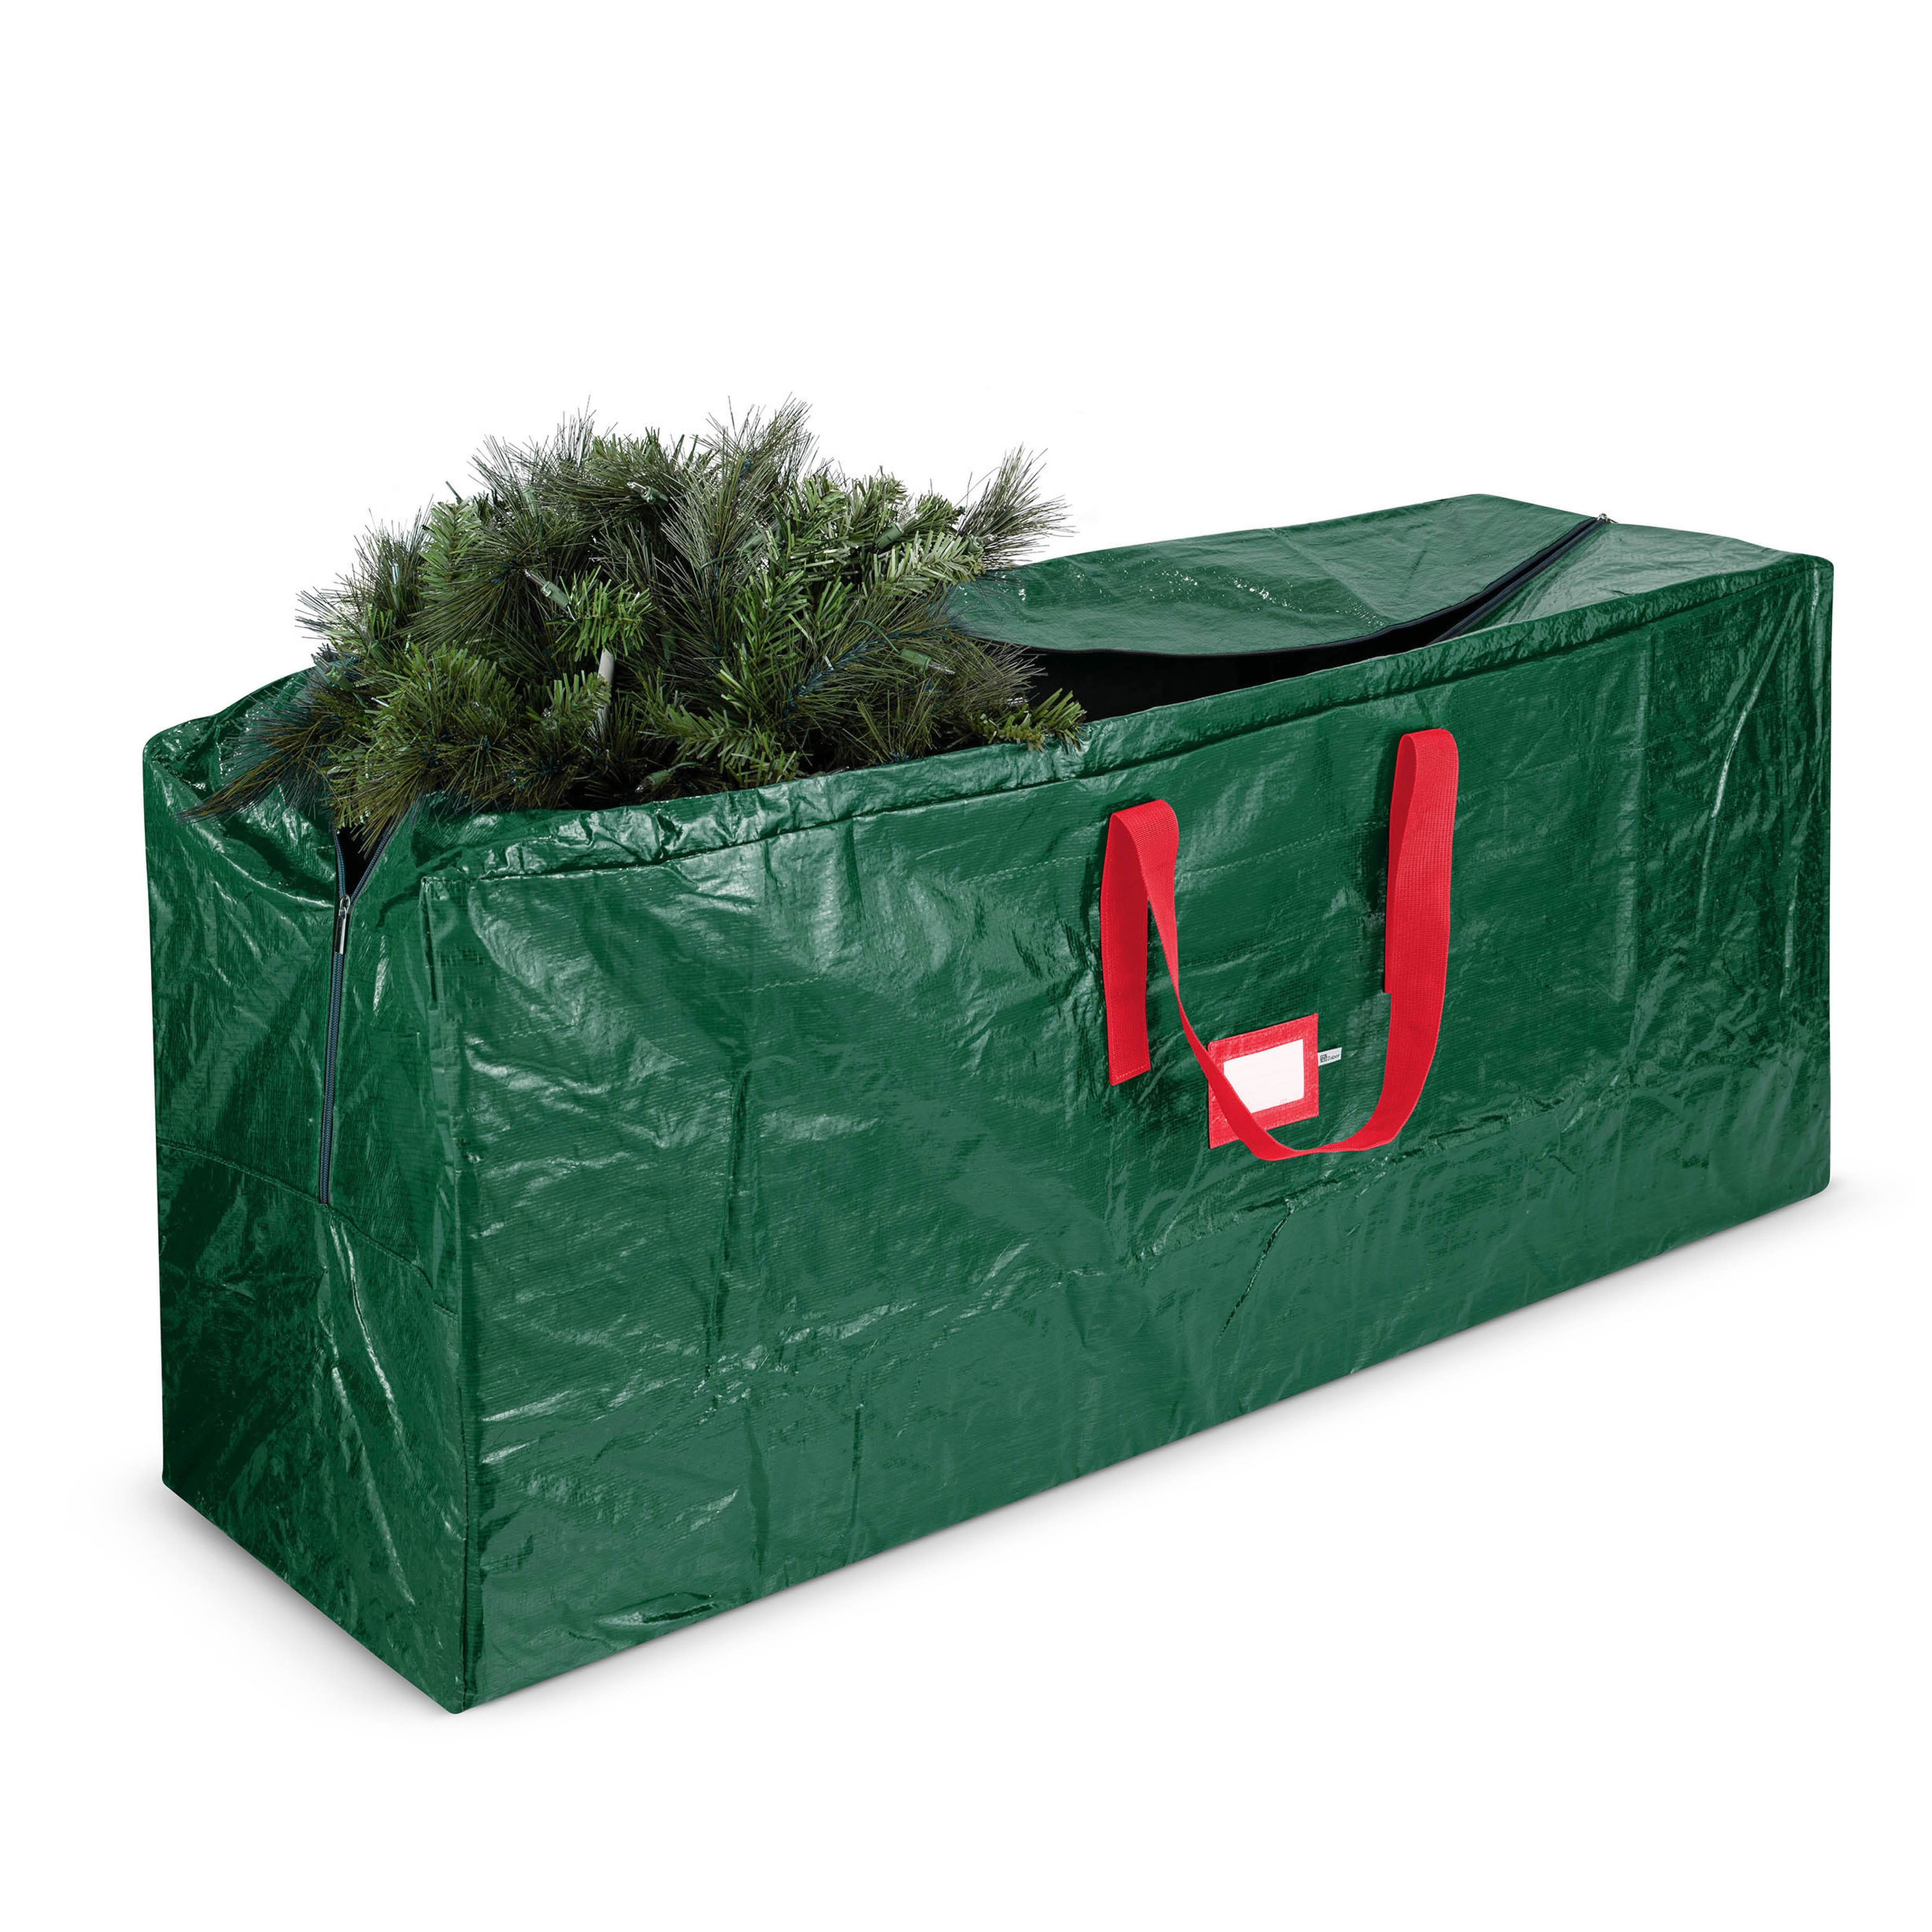 Details about   Large Christmas Disassemble Tree Storage Bag Container Heavy Duty Zipper Handle 